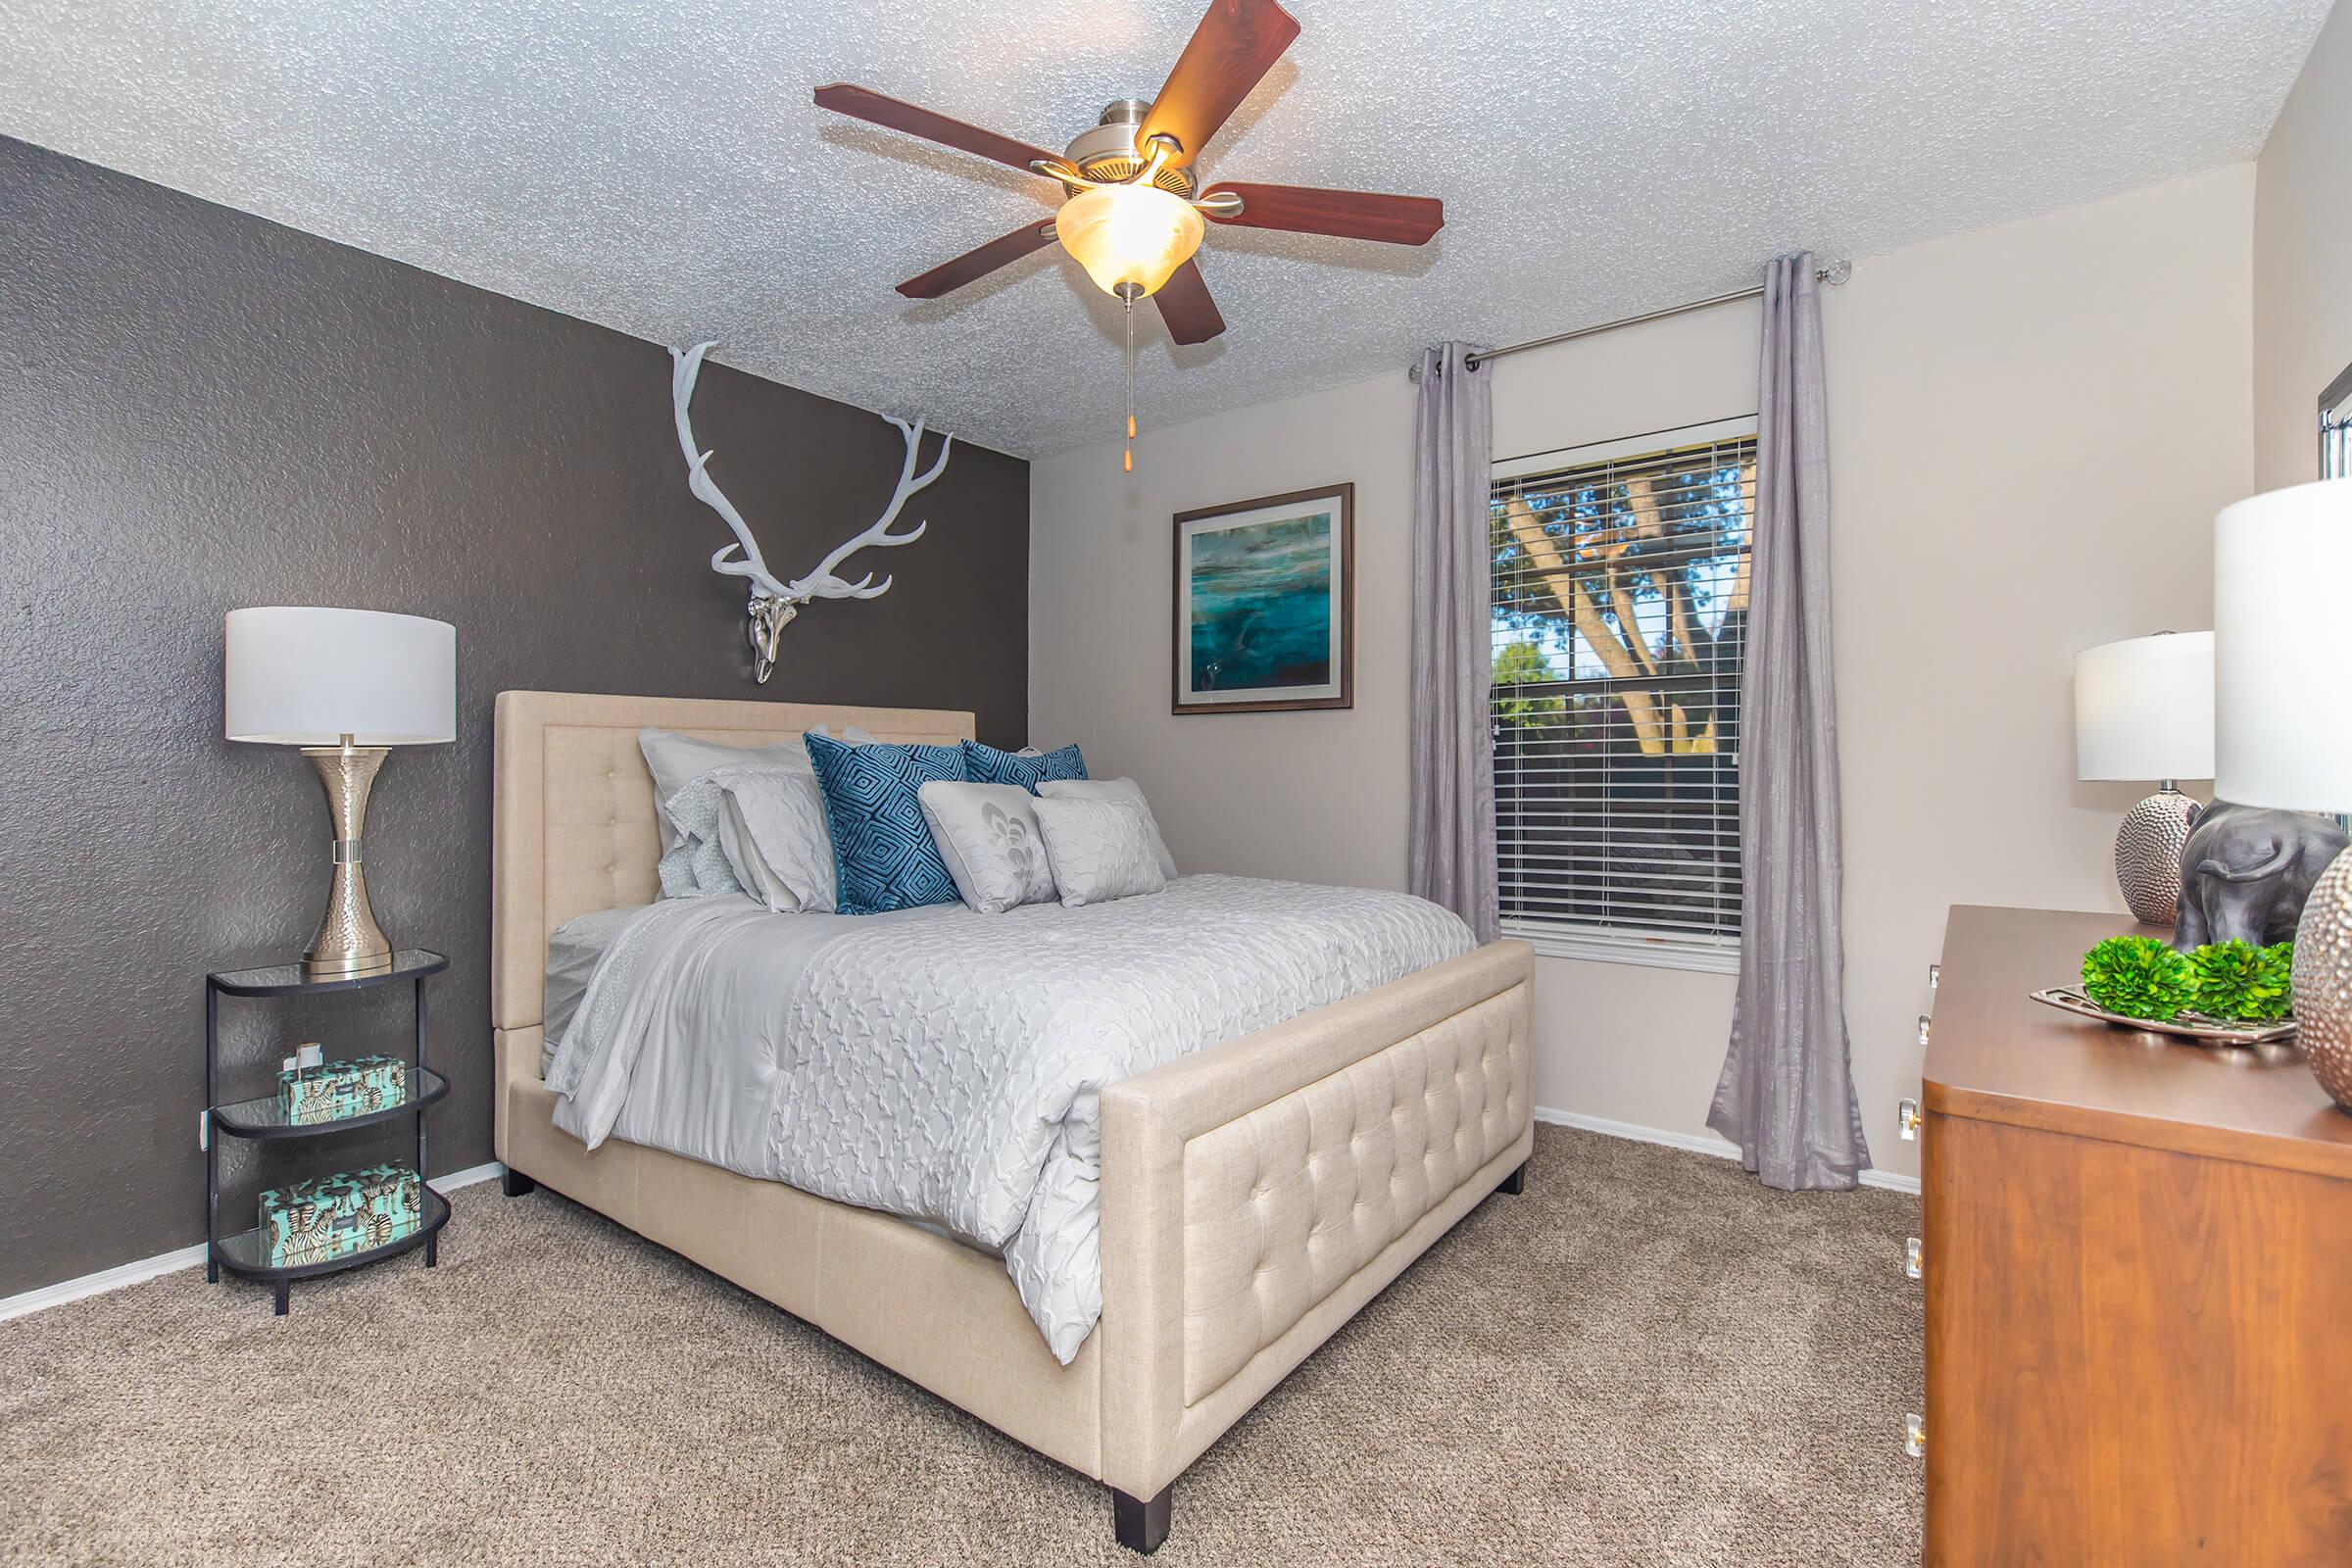 A bedroom with carpeting, a window, a queen bed and a dresser at Rise Oak Creek.